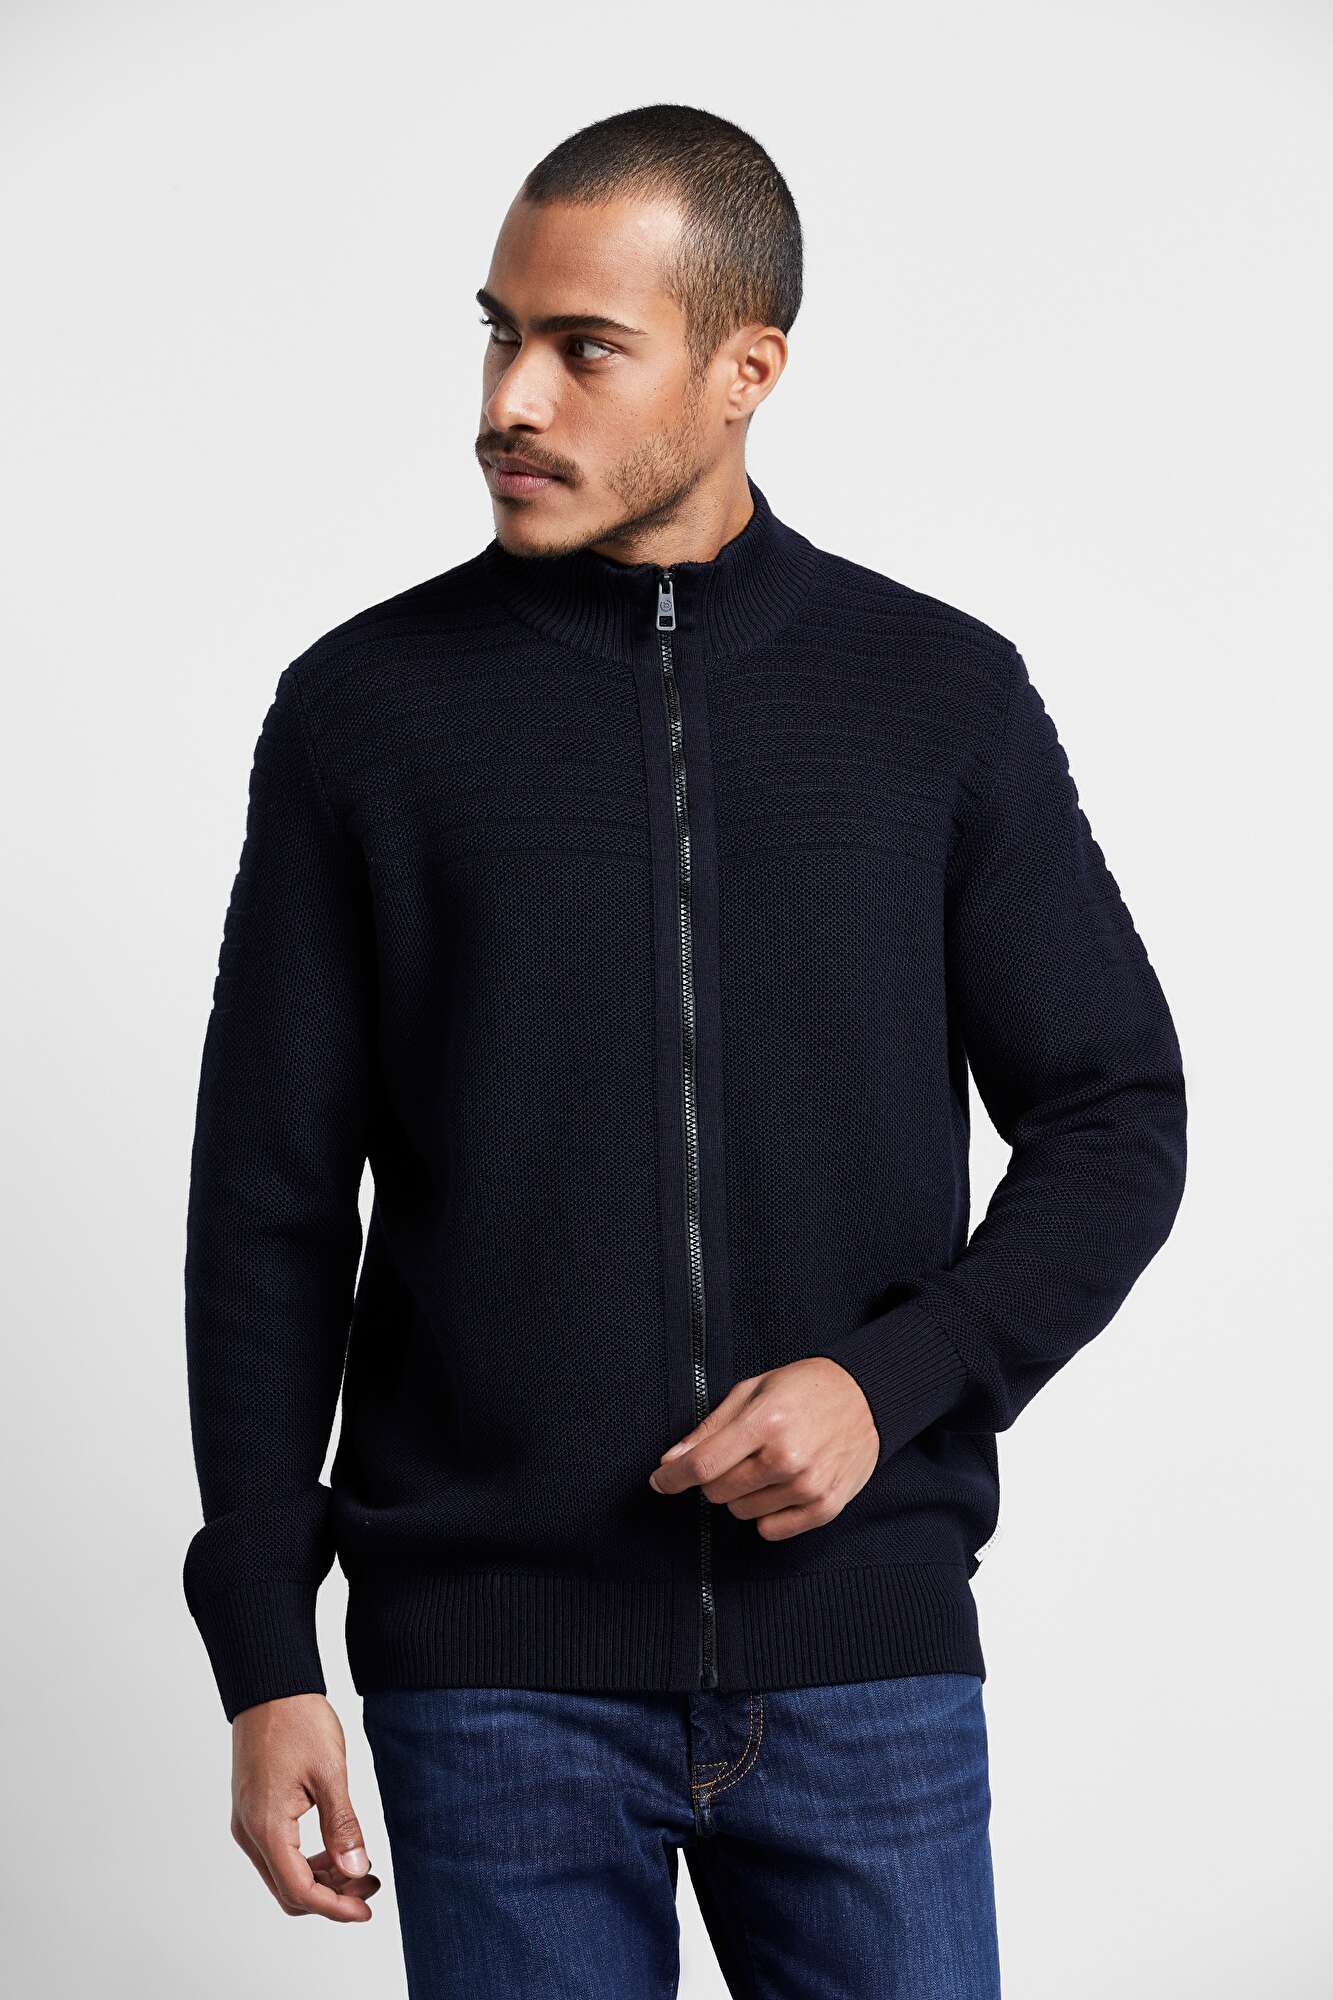 Knit jacket with band collar in navy | bugatti